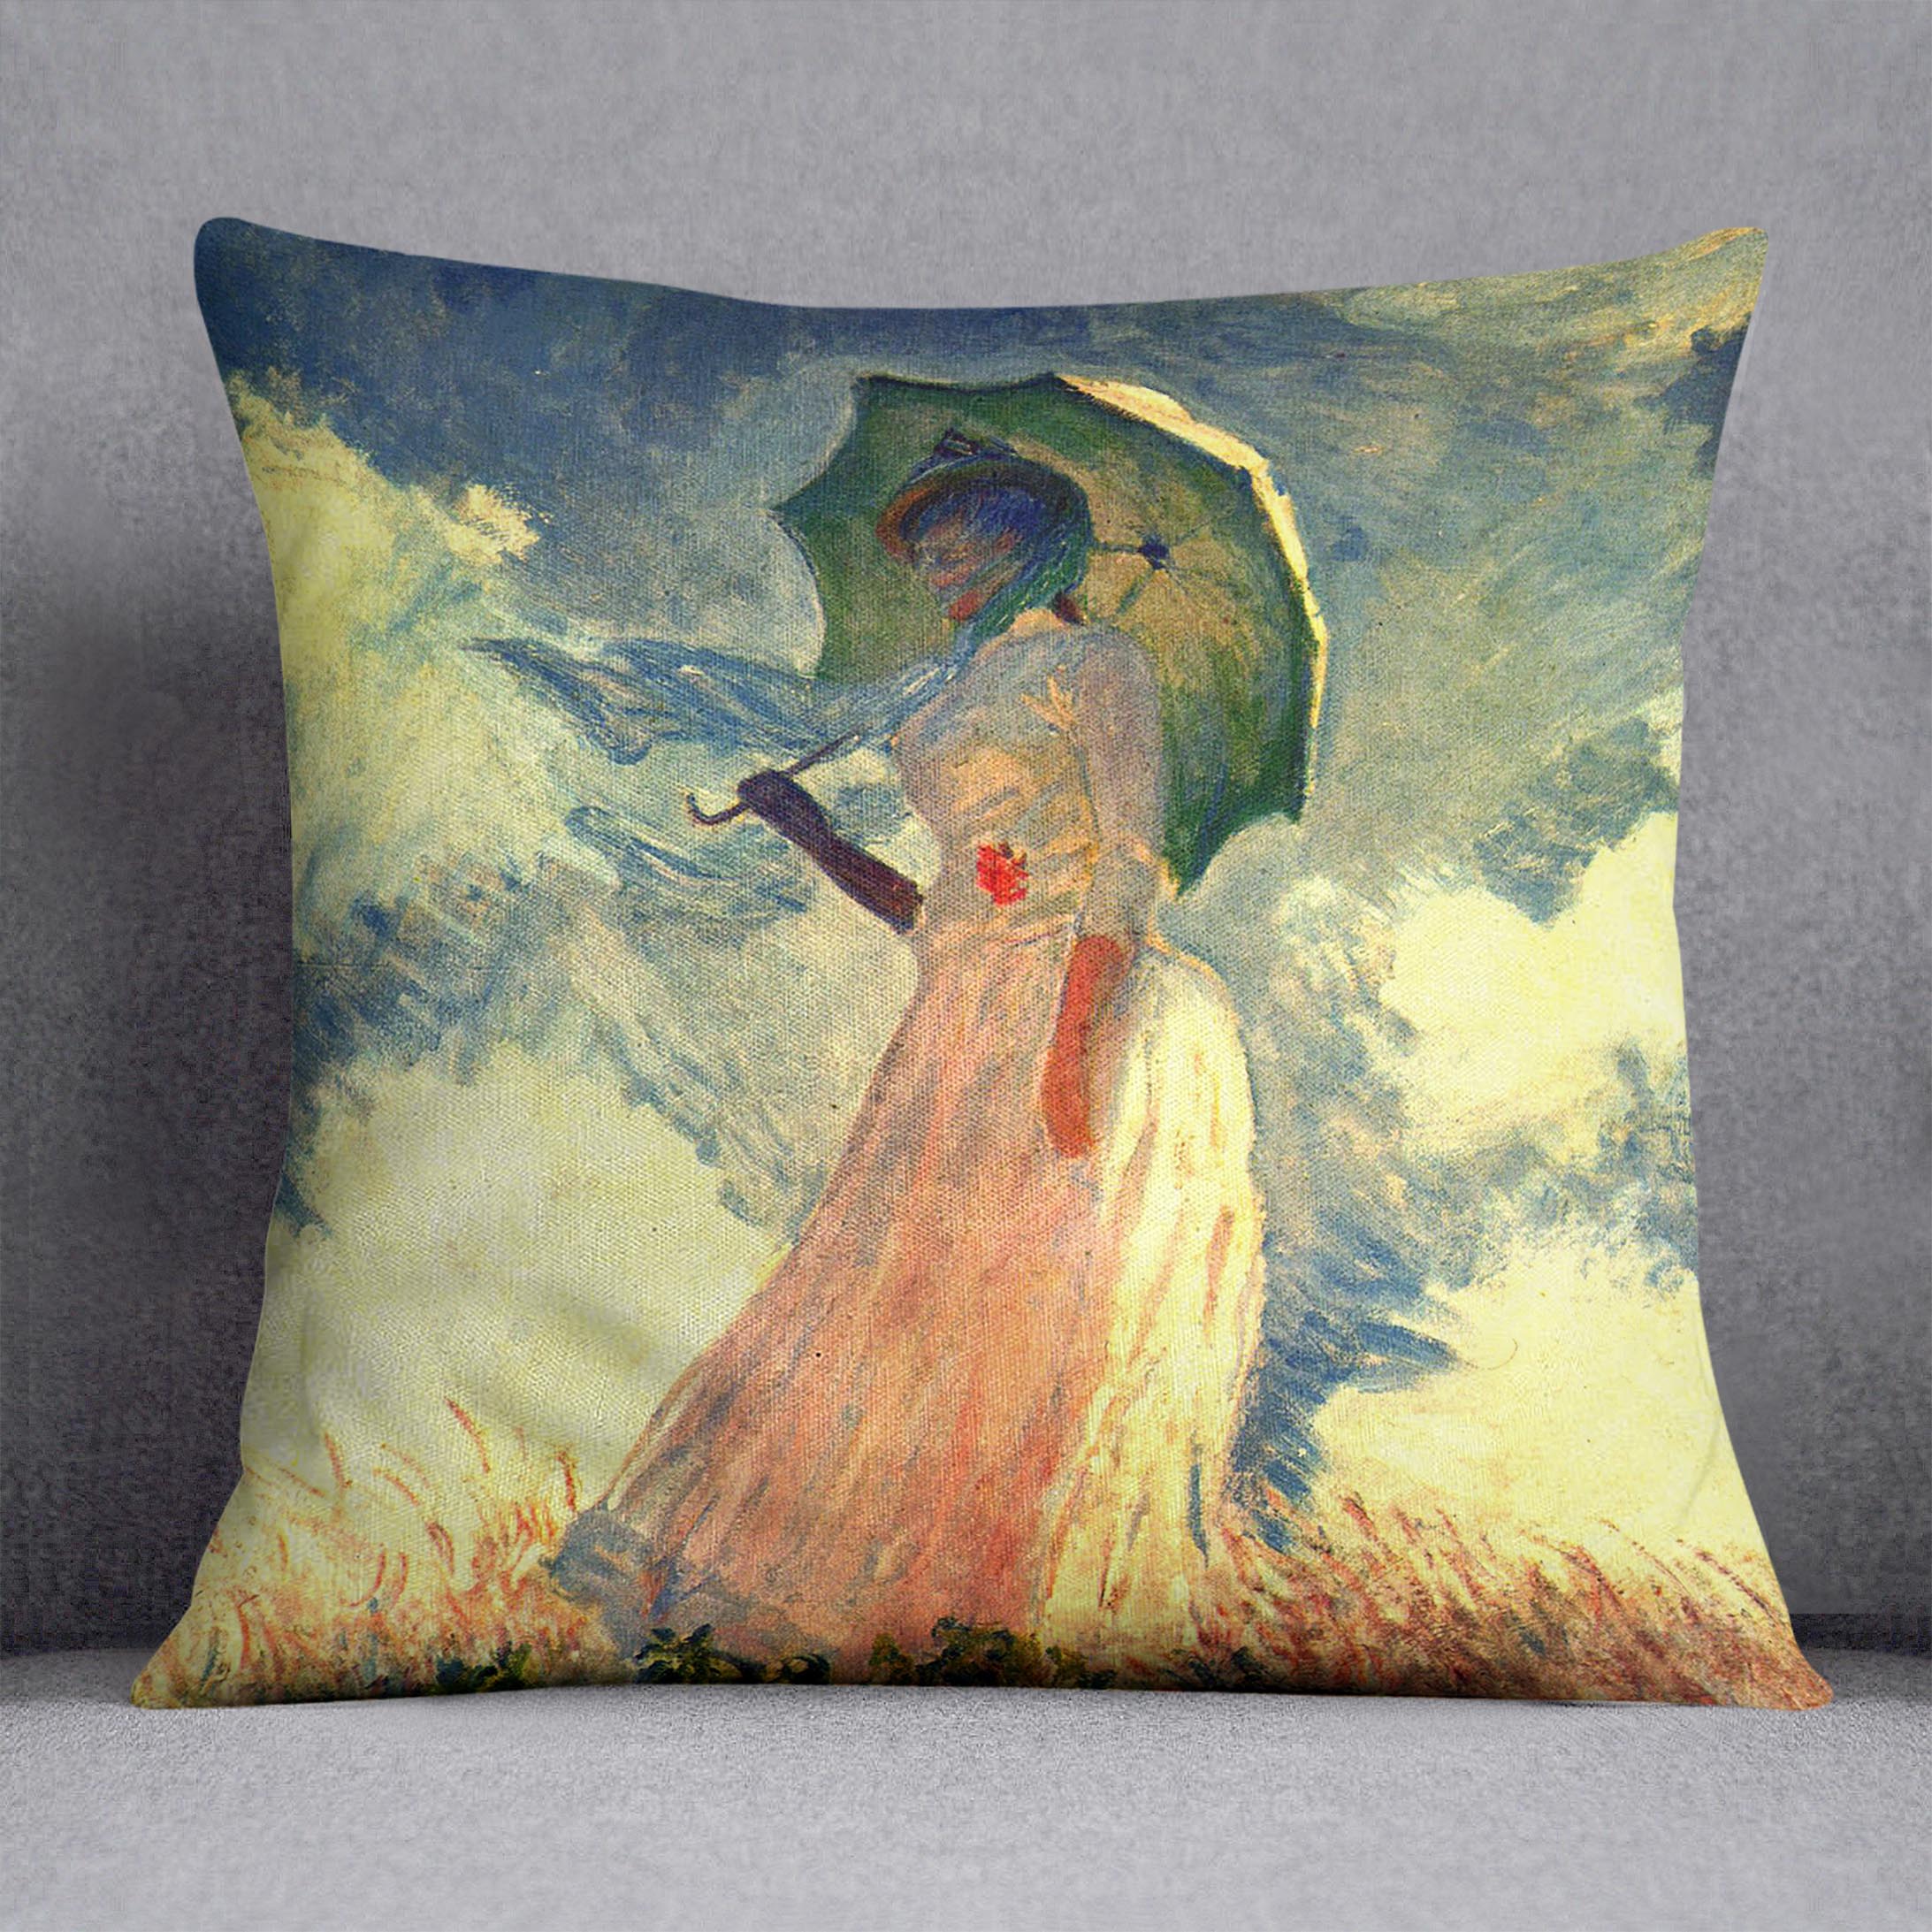 Woman with sunshade by Monet Cushion